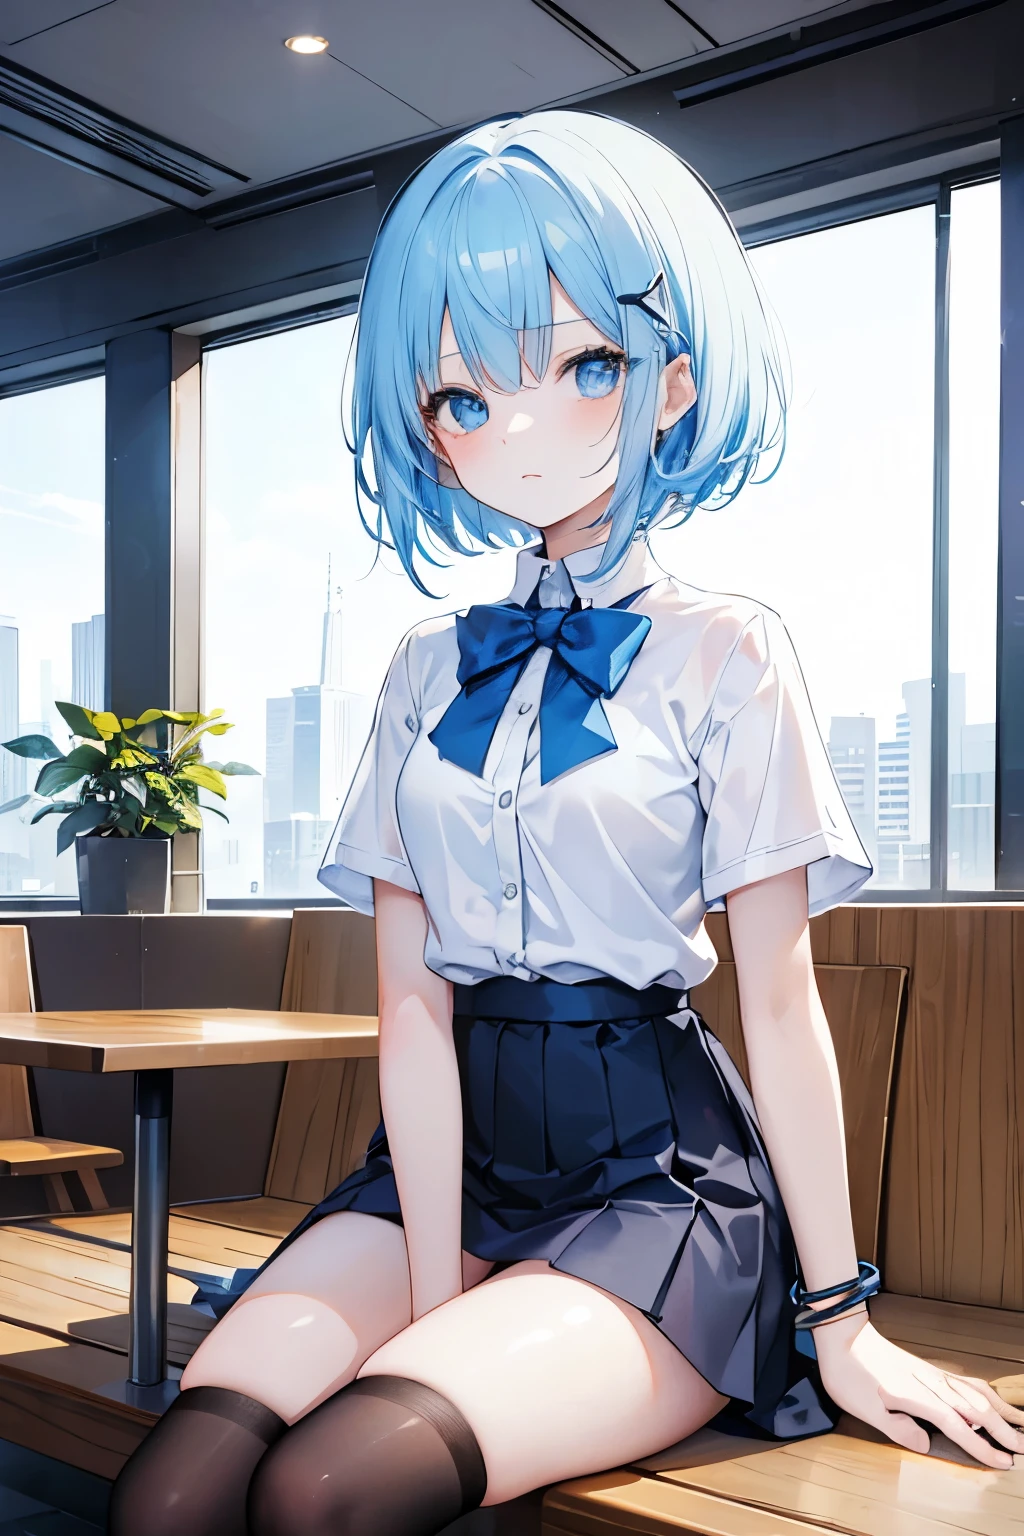 (Best quality, Masterpiece:1.3), sitting comfortably in a cafe, User Chibi-Style, vivid Copic marker anime illustration, maintains a 3:1 head-to-body ratio, 1 girl, short hair, ice blue hair, bangs, blue eyes, future uniform, white and blue with black accents, glowing bracelet, glowing hairpin, no belongings, single object, white background for removing background, full body illustration, Natural Indoor Light, cozy atmosphere.